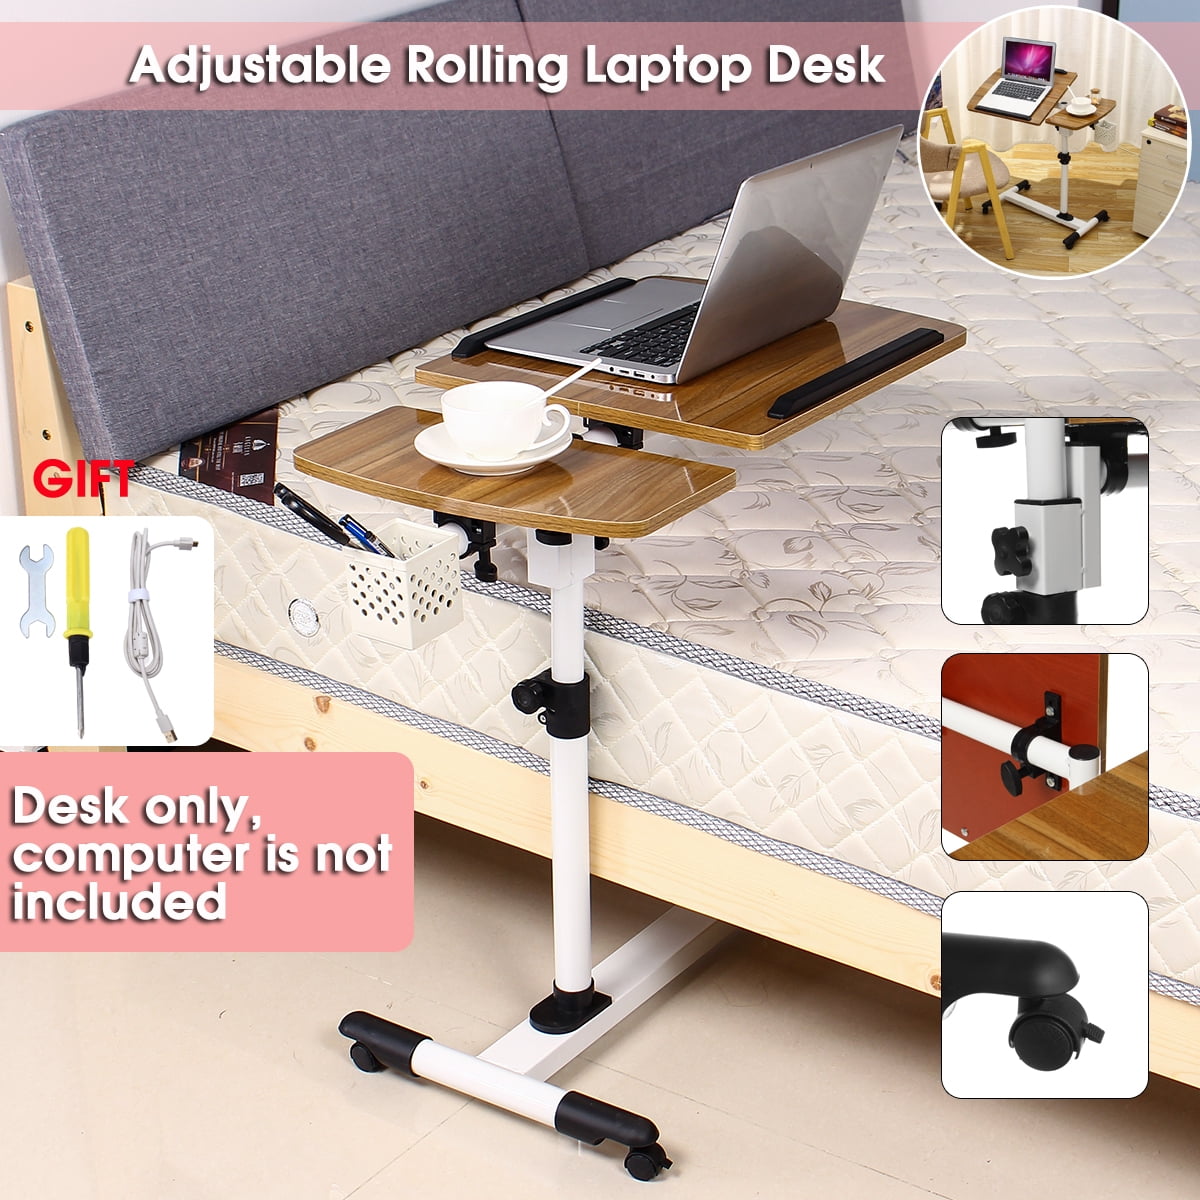 Movable Sturdy Laptop Rolling Table Foxemart Rolling Desks with Wheels 39 Inch Portable Computer Desk with Locking Caster White Modern Mobile Writing Study Home Office Desk 